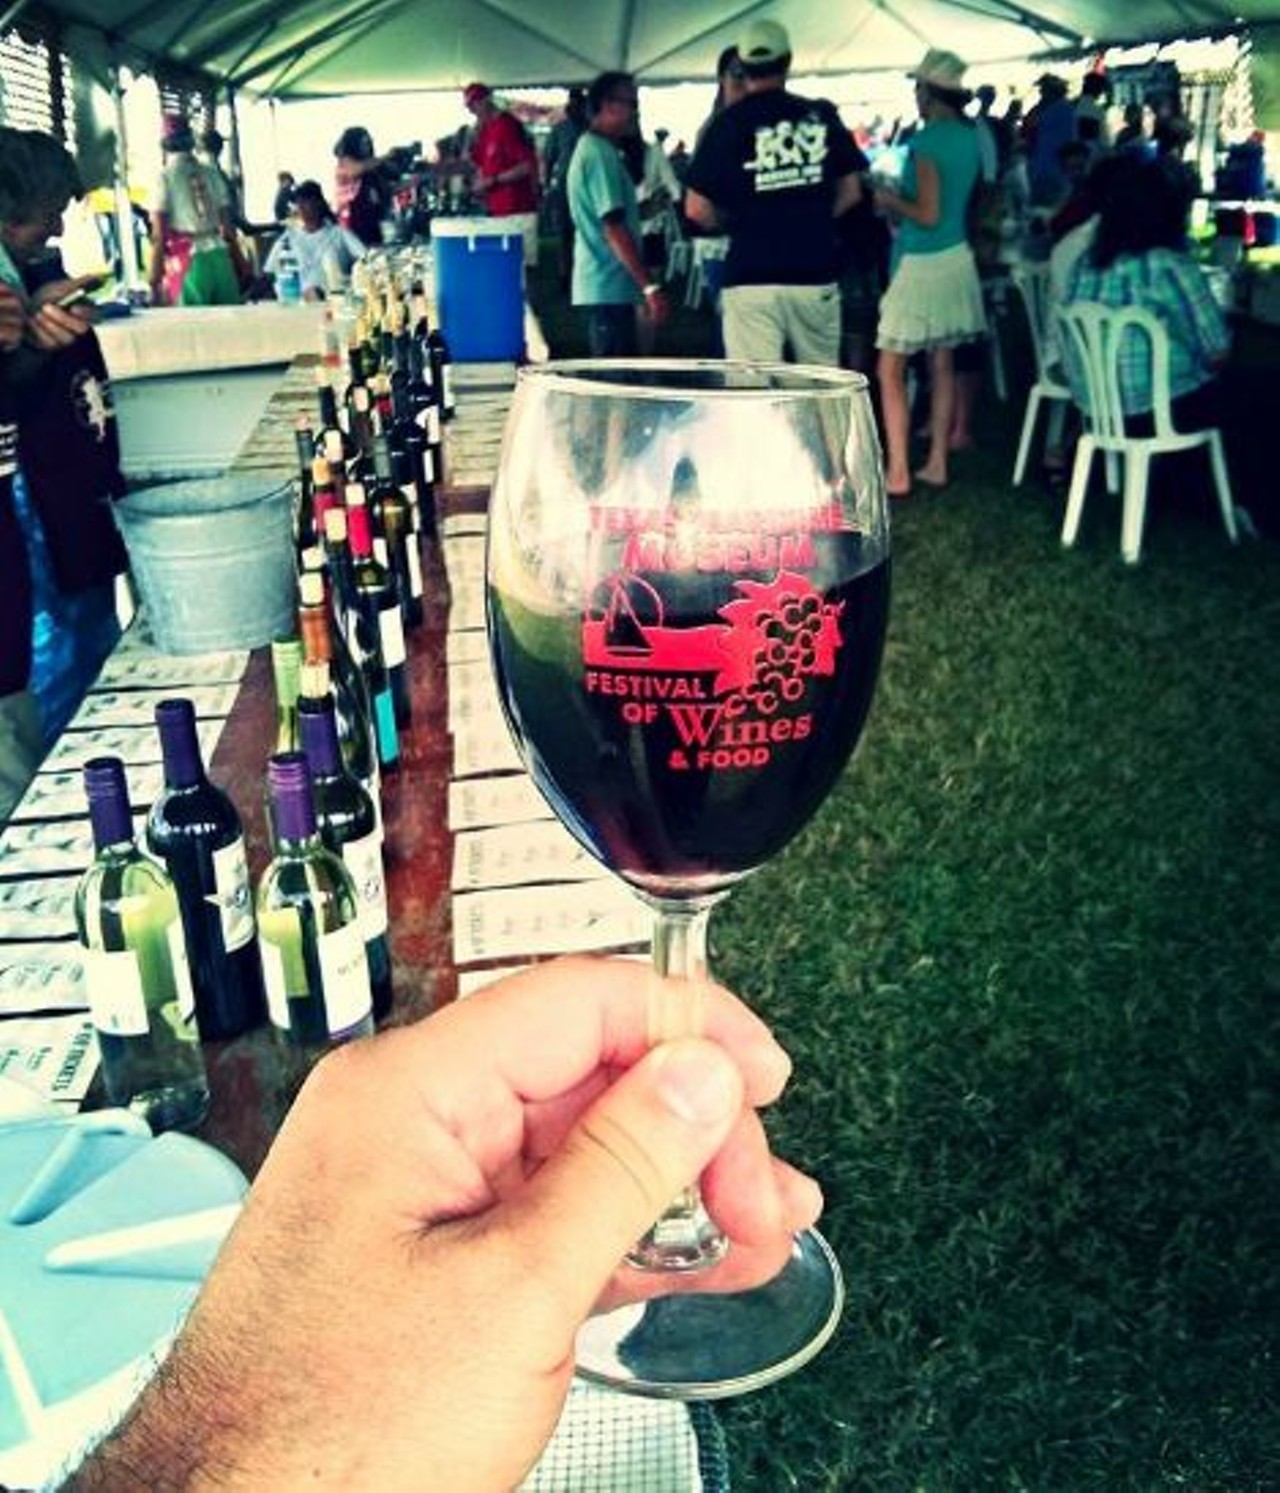 Rockport Festival of Wine and Food
May 27-28, 1202 Navigation Cir, Rockport, texasfestivalofwines.com
You&#146;ll be in heaven with more than 100 varieties of wine.
Photo via Facebook, Jerry Davila